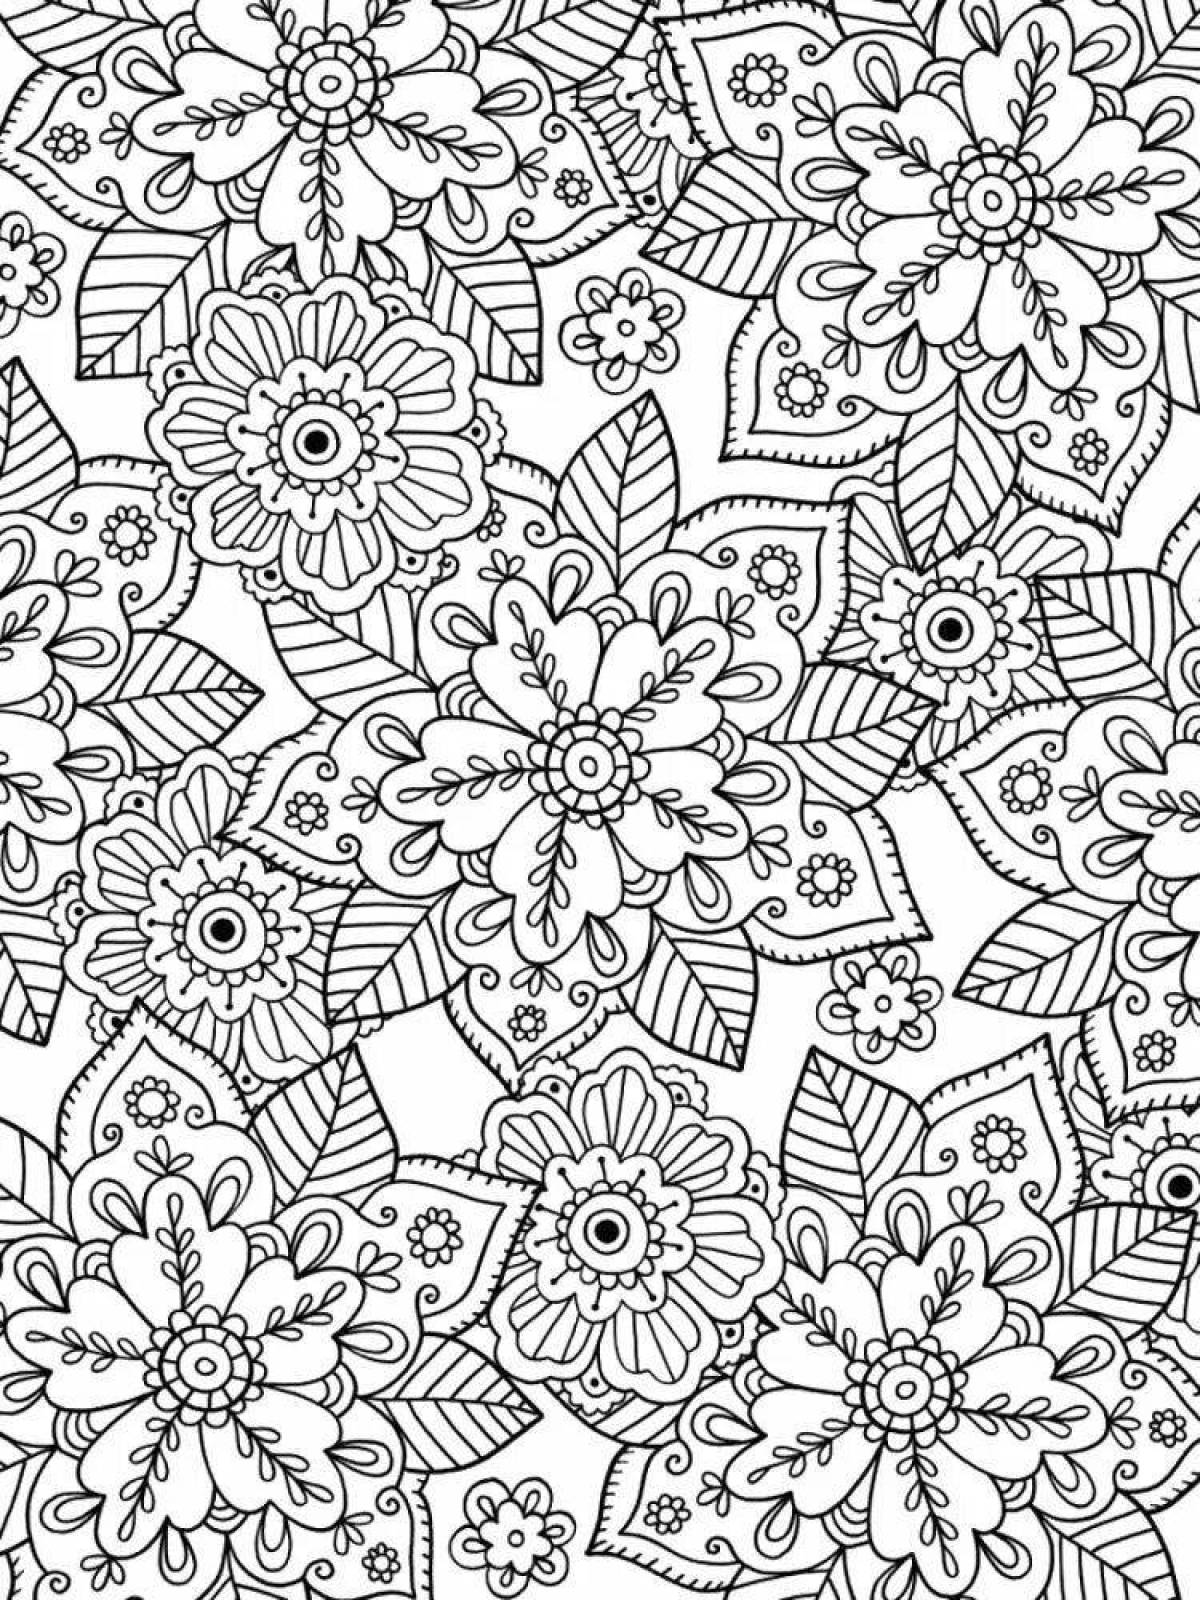 Attractive patterned coloring